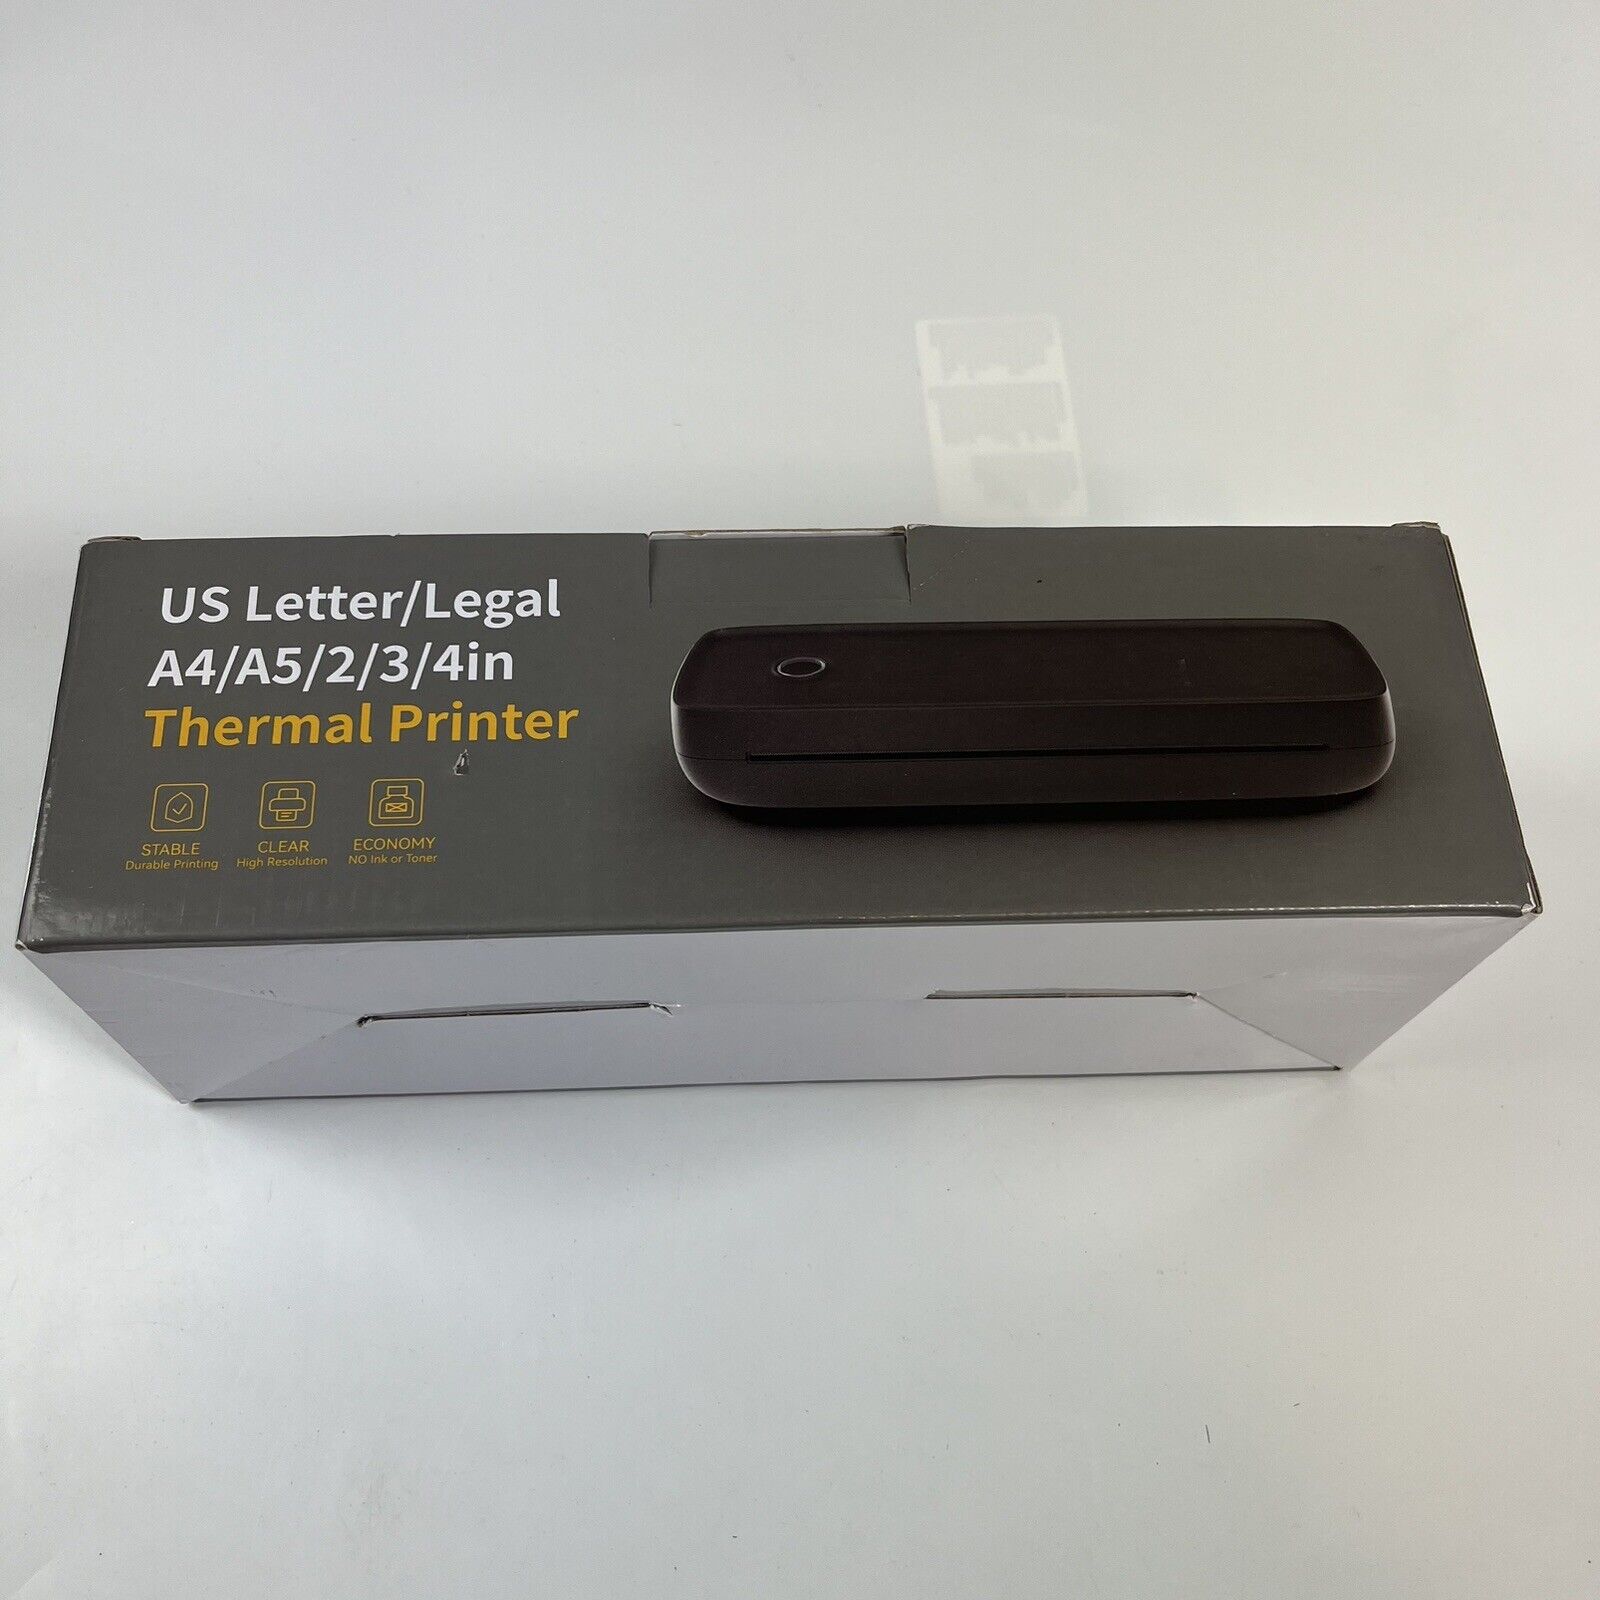 US Letter Legal A4 A5 2 3 4 in Thermal Printer Portable NEW OPEN BOX